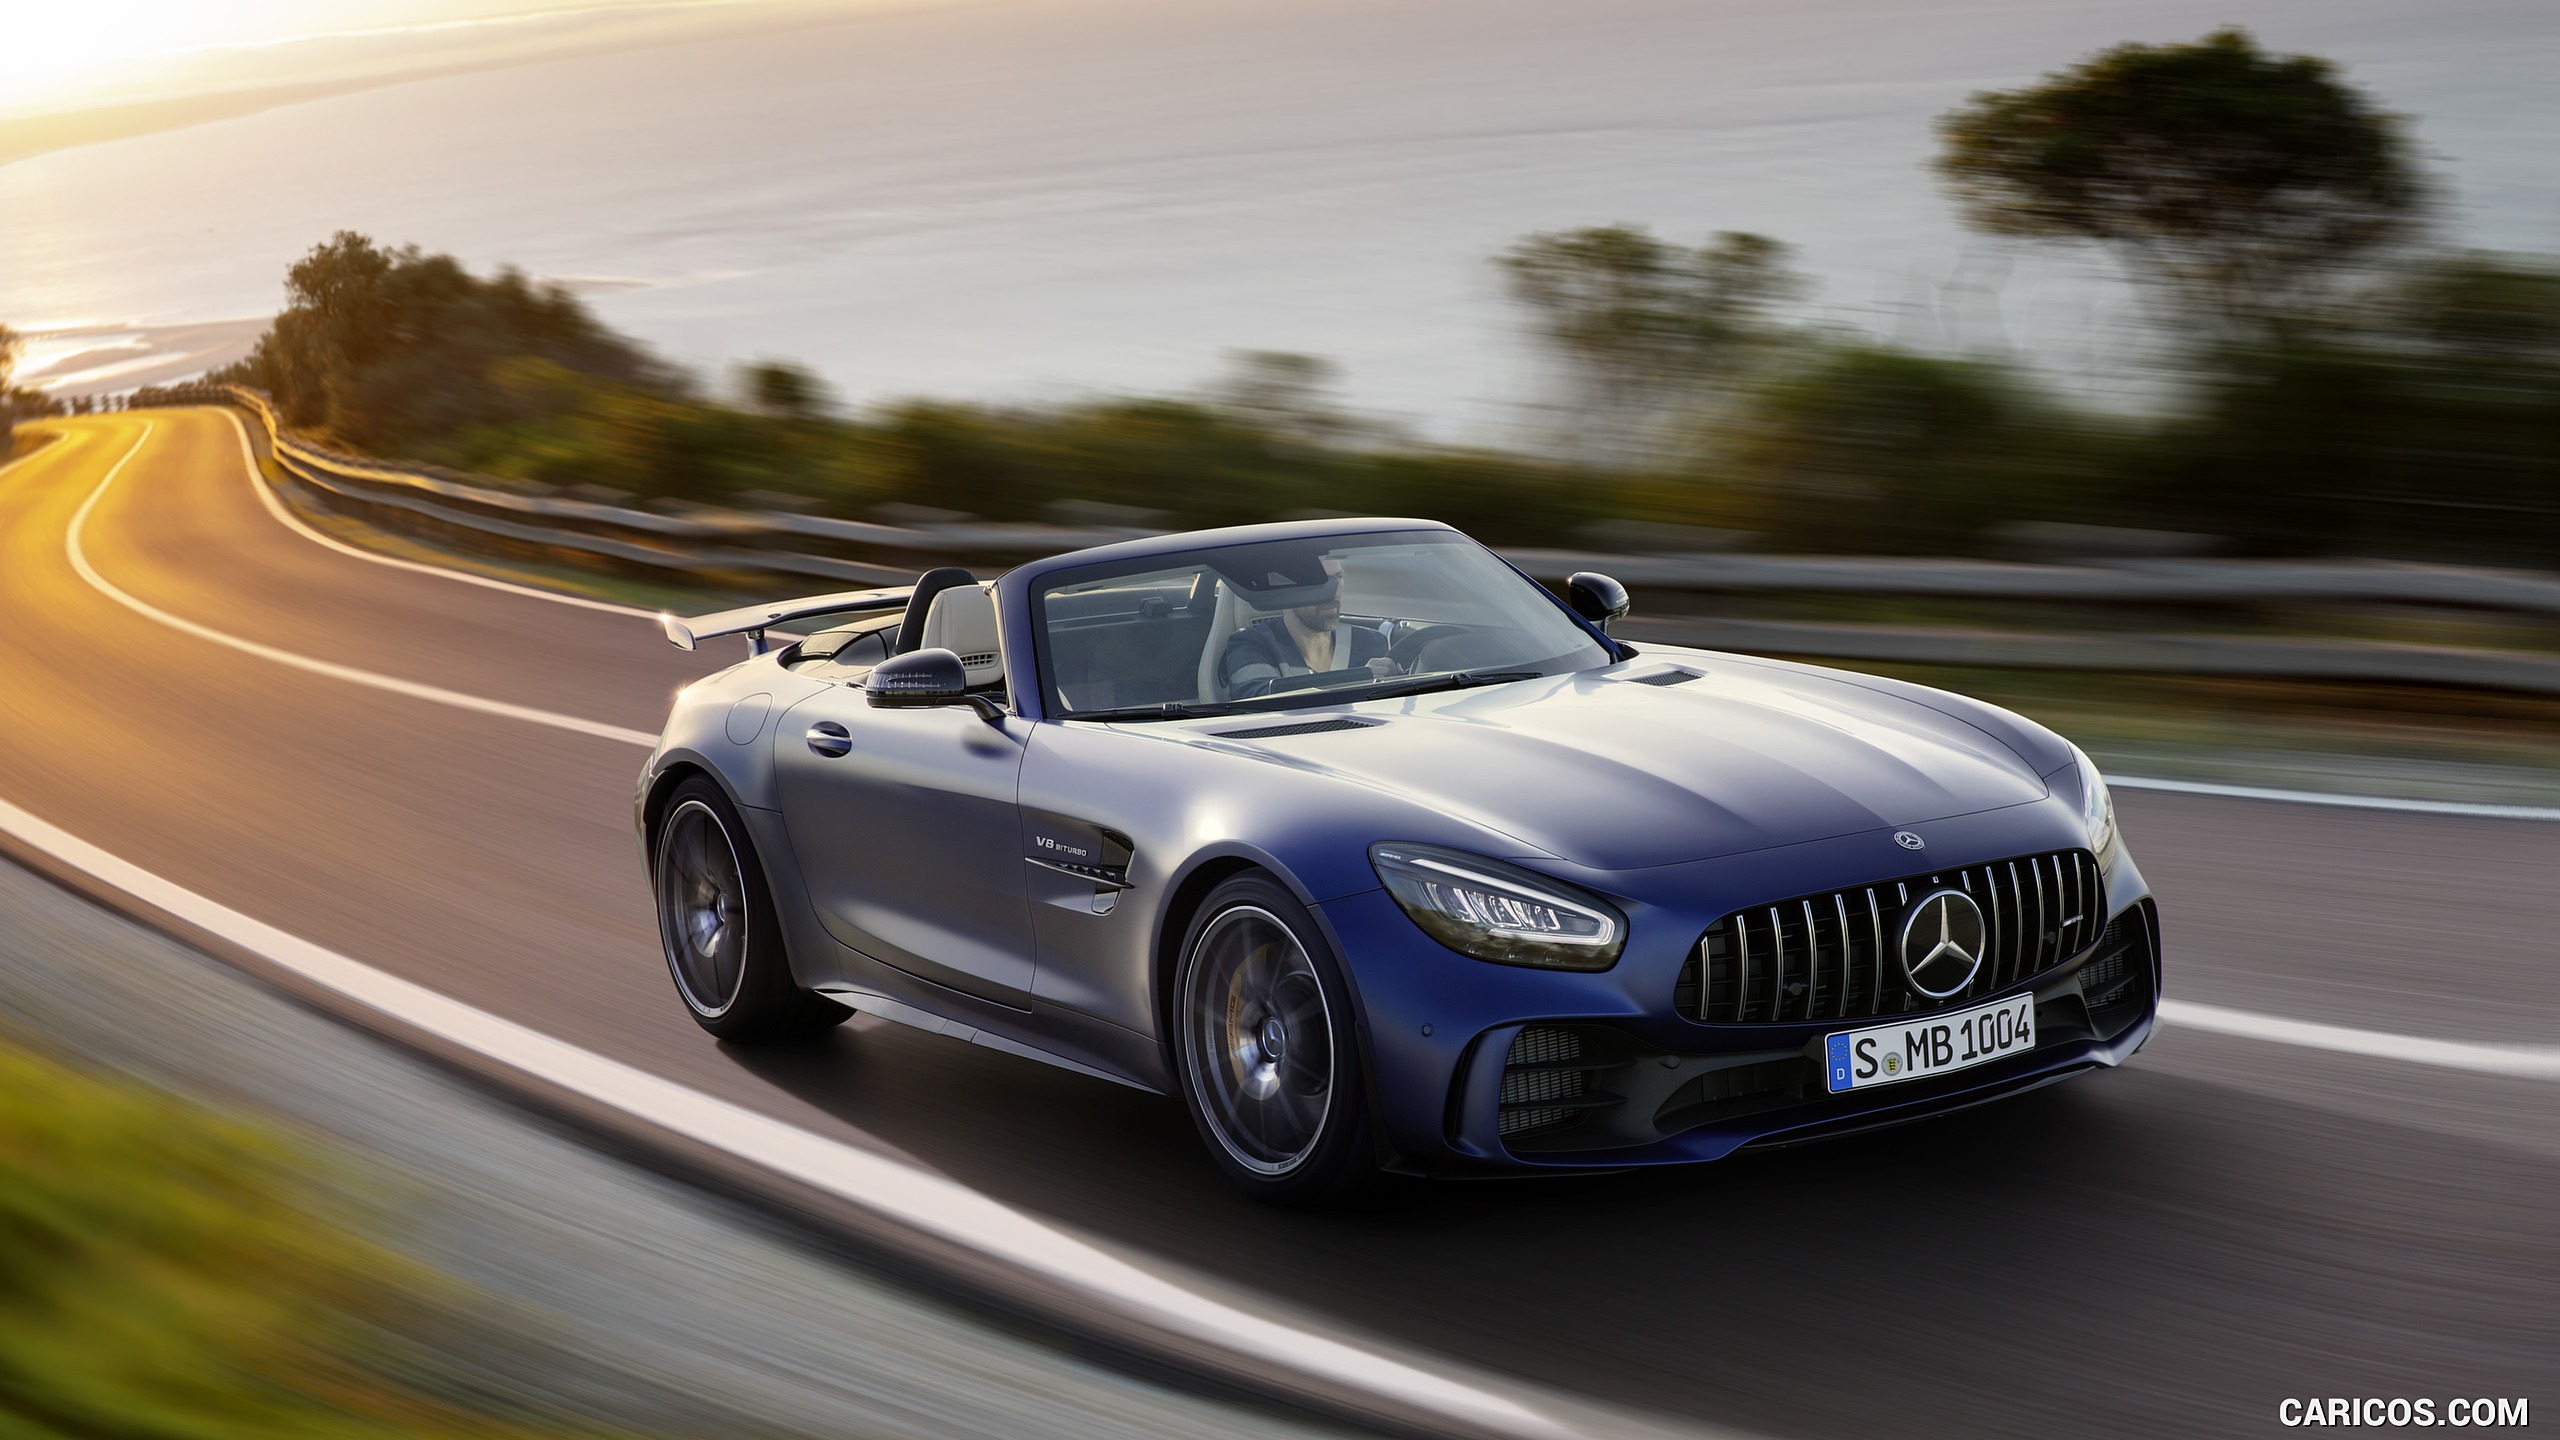 2020 Mercedes-AMG GT R Roadster - Front Three-Quarter, #3 of 246